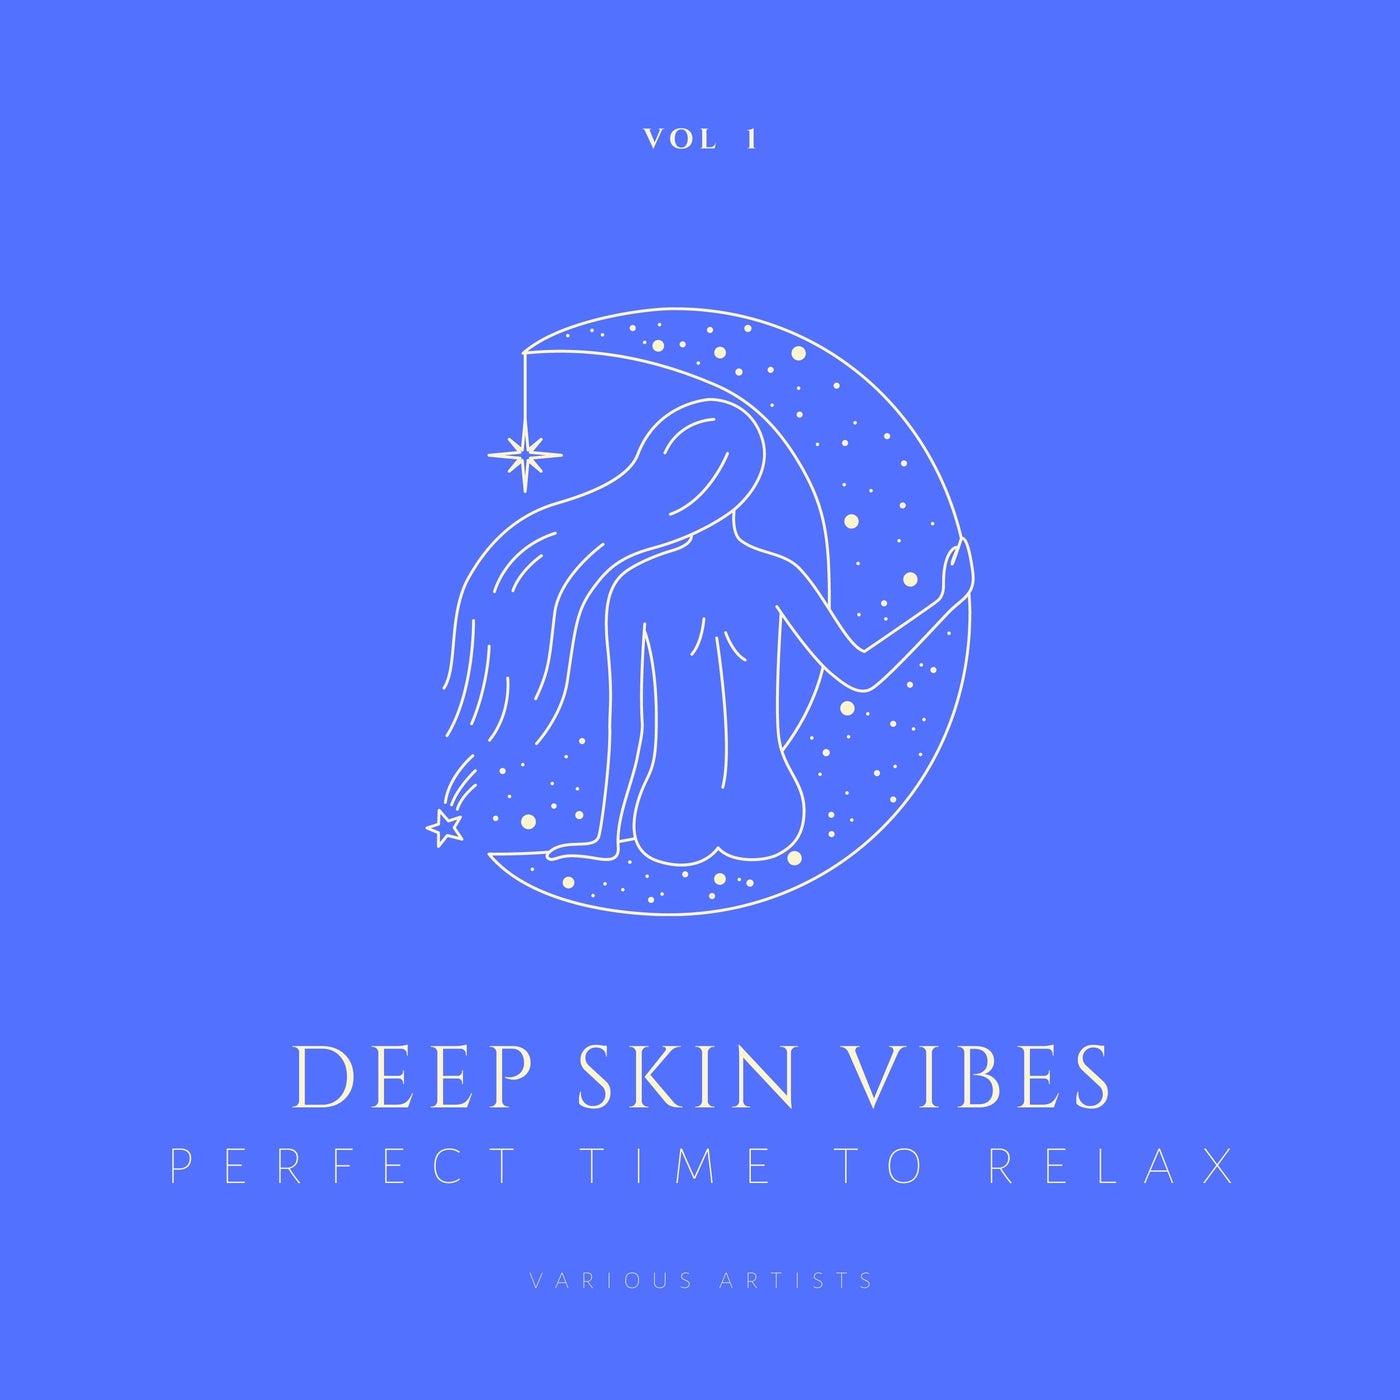 Deep Skin Vibes (Perfect Time To Relax), Vol. 1